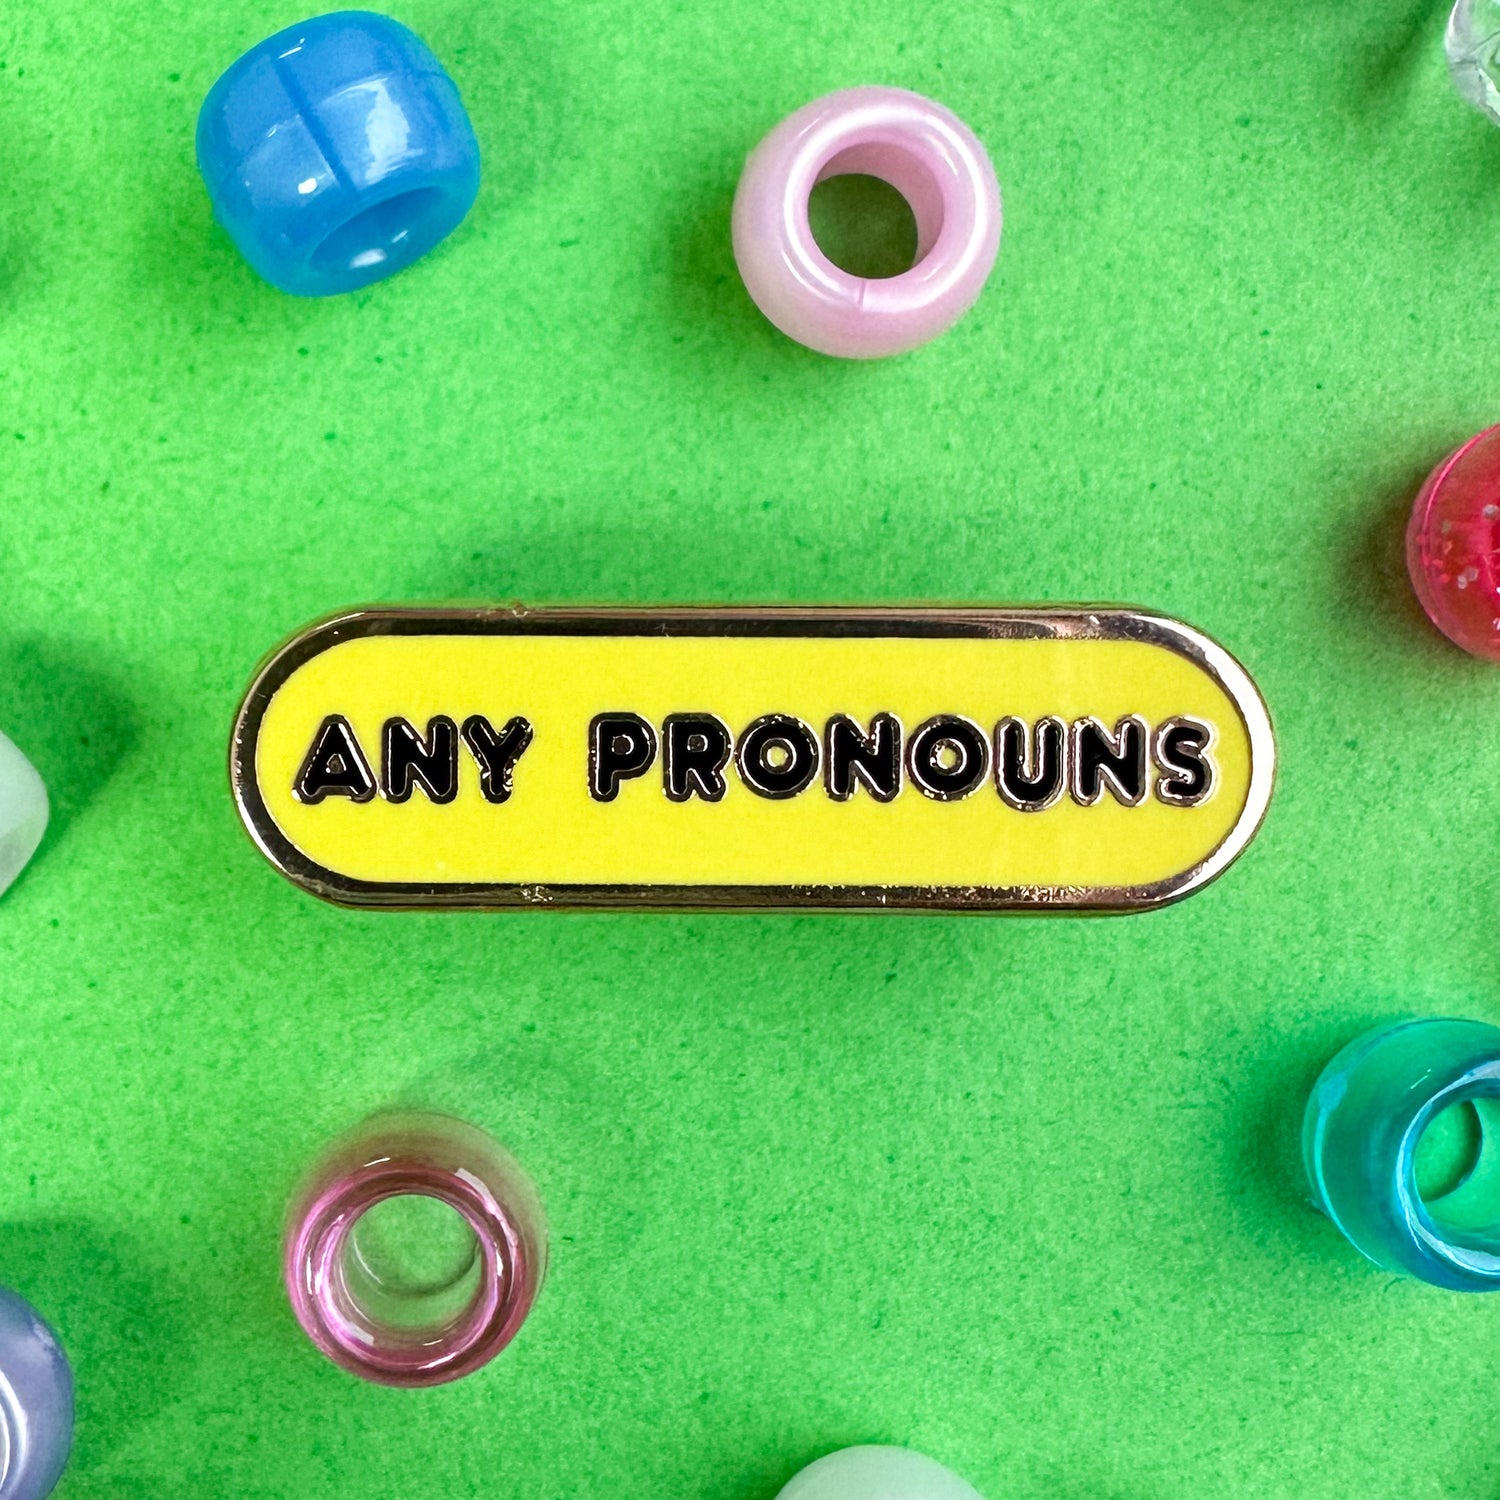 A bandaid shaped enamel pin with black letters that read "Any pronouns" with a yellow background. The pin is on a green background with pony beads strewn around it. 